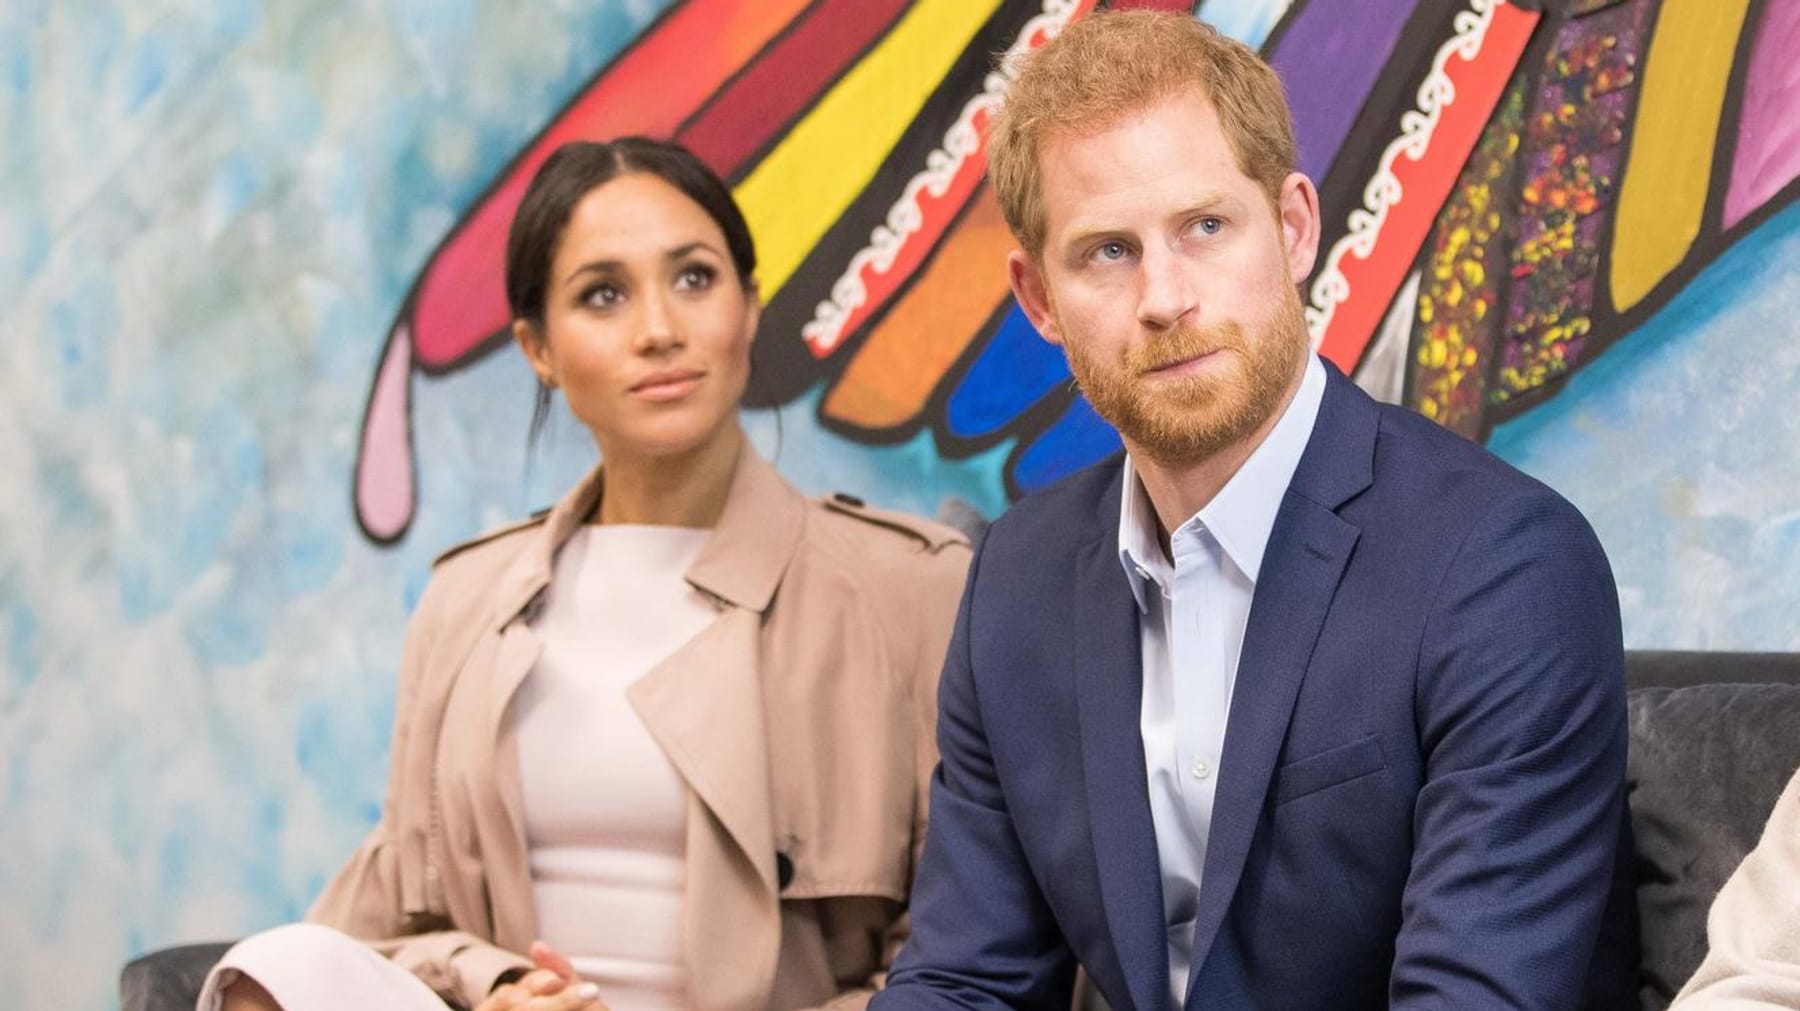 During Harry and Meghan’s visit: earthquake in New Zealand